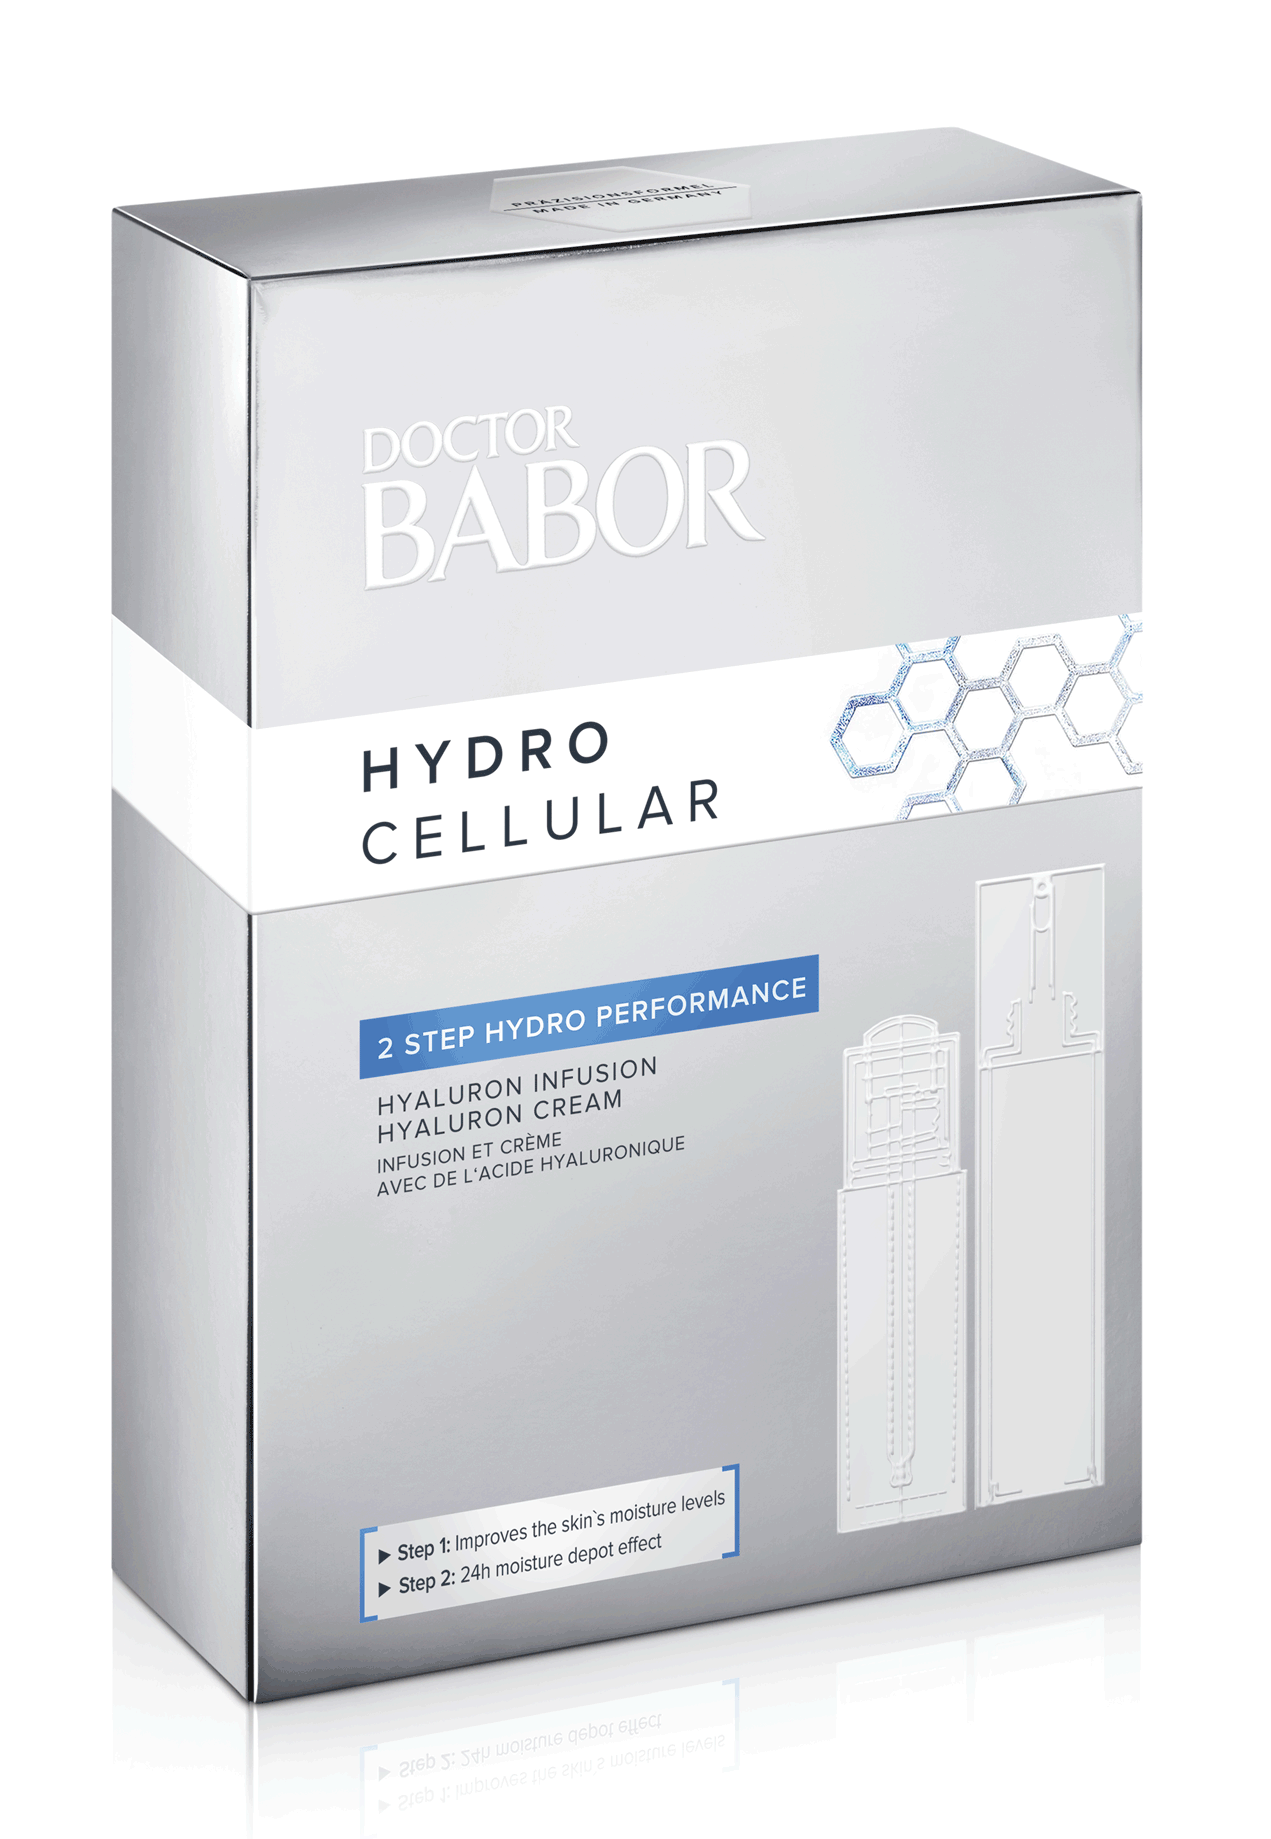 2022 05 Hydro Cellular Set Verpackung